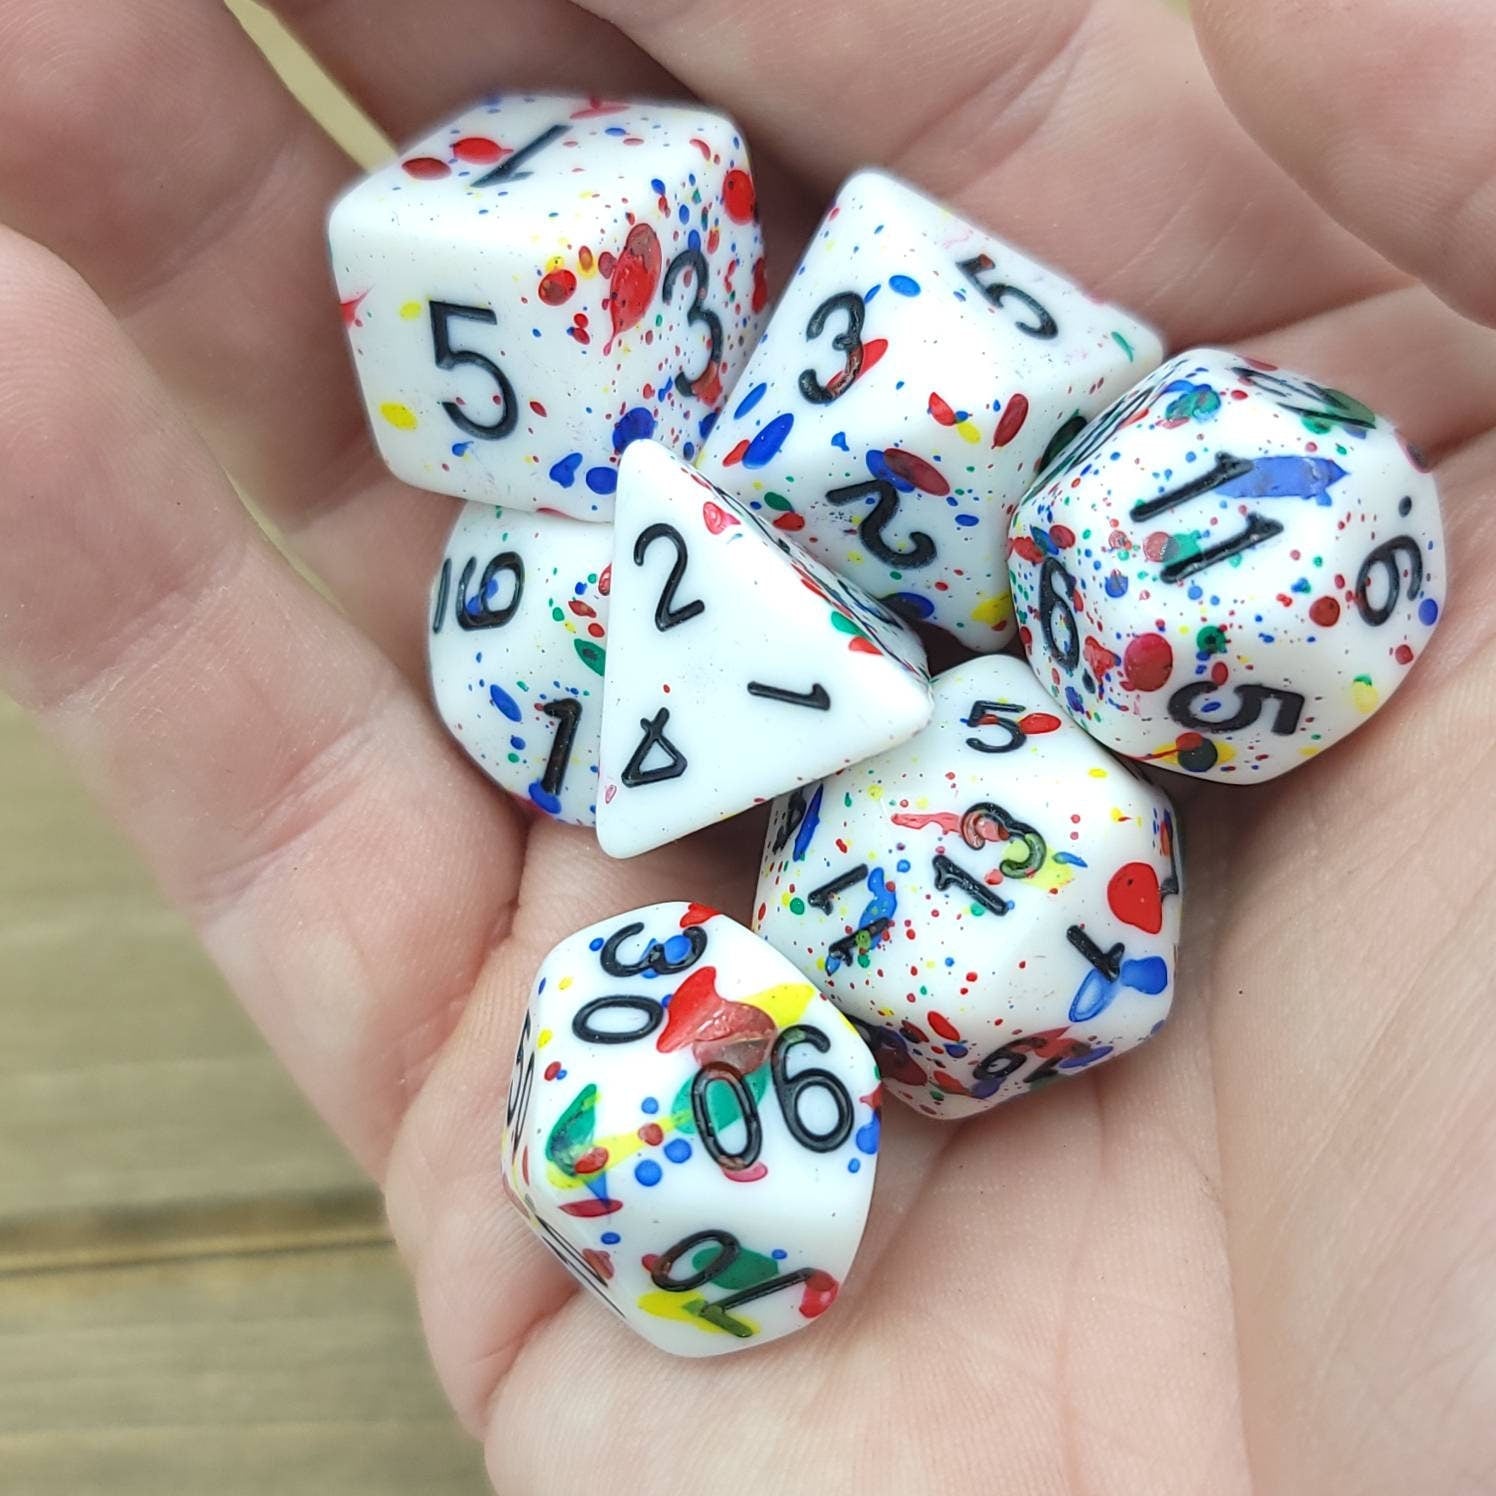 Jesters Blood | RPG Dice Set| RPG Dice | Polyhedral Dice Set | Dungeons and Dragons | DnD Dice Set | Gaming Dice Set